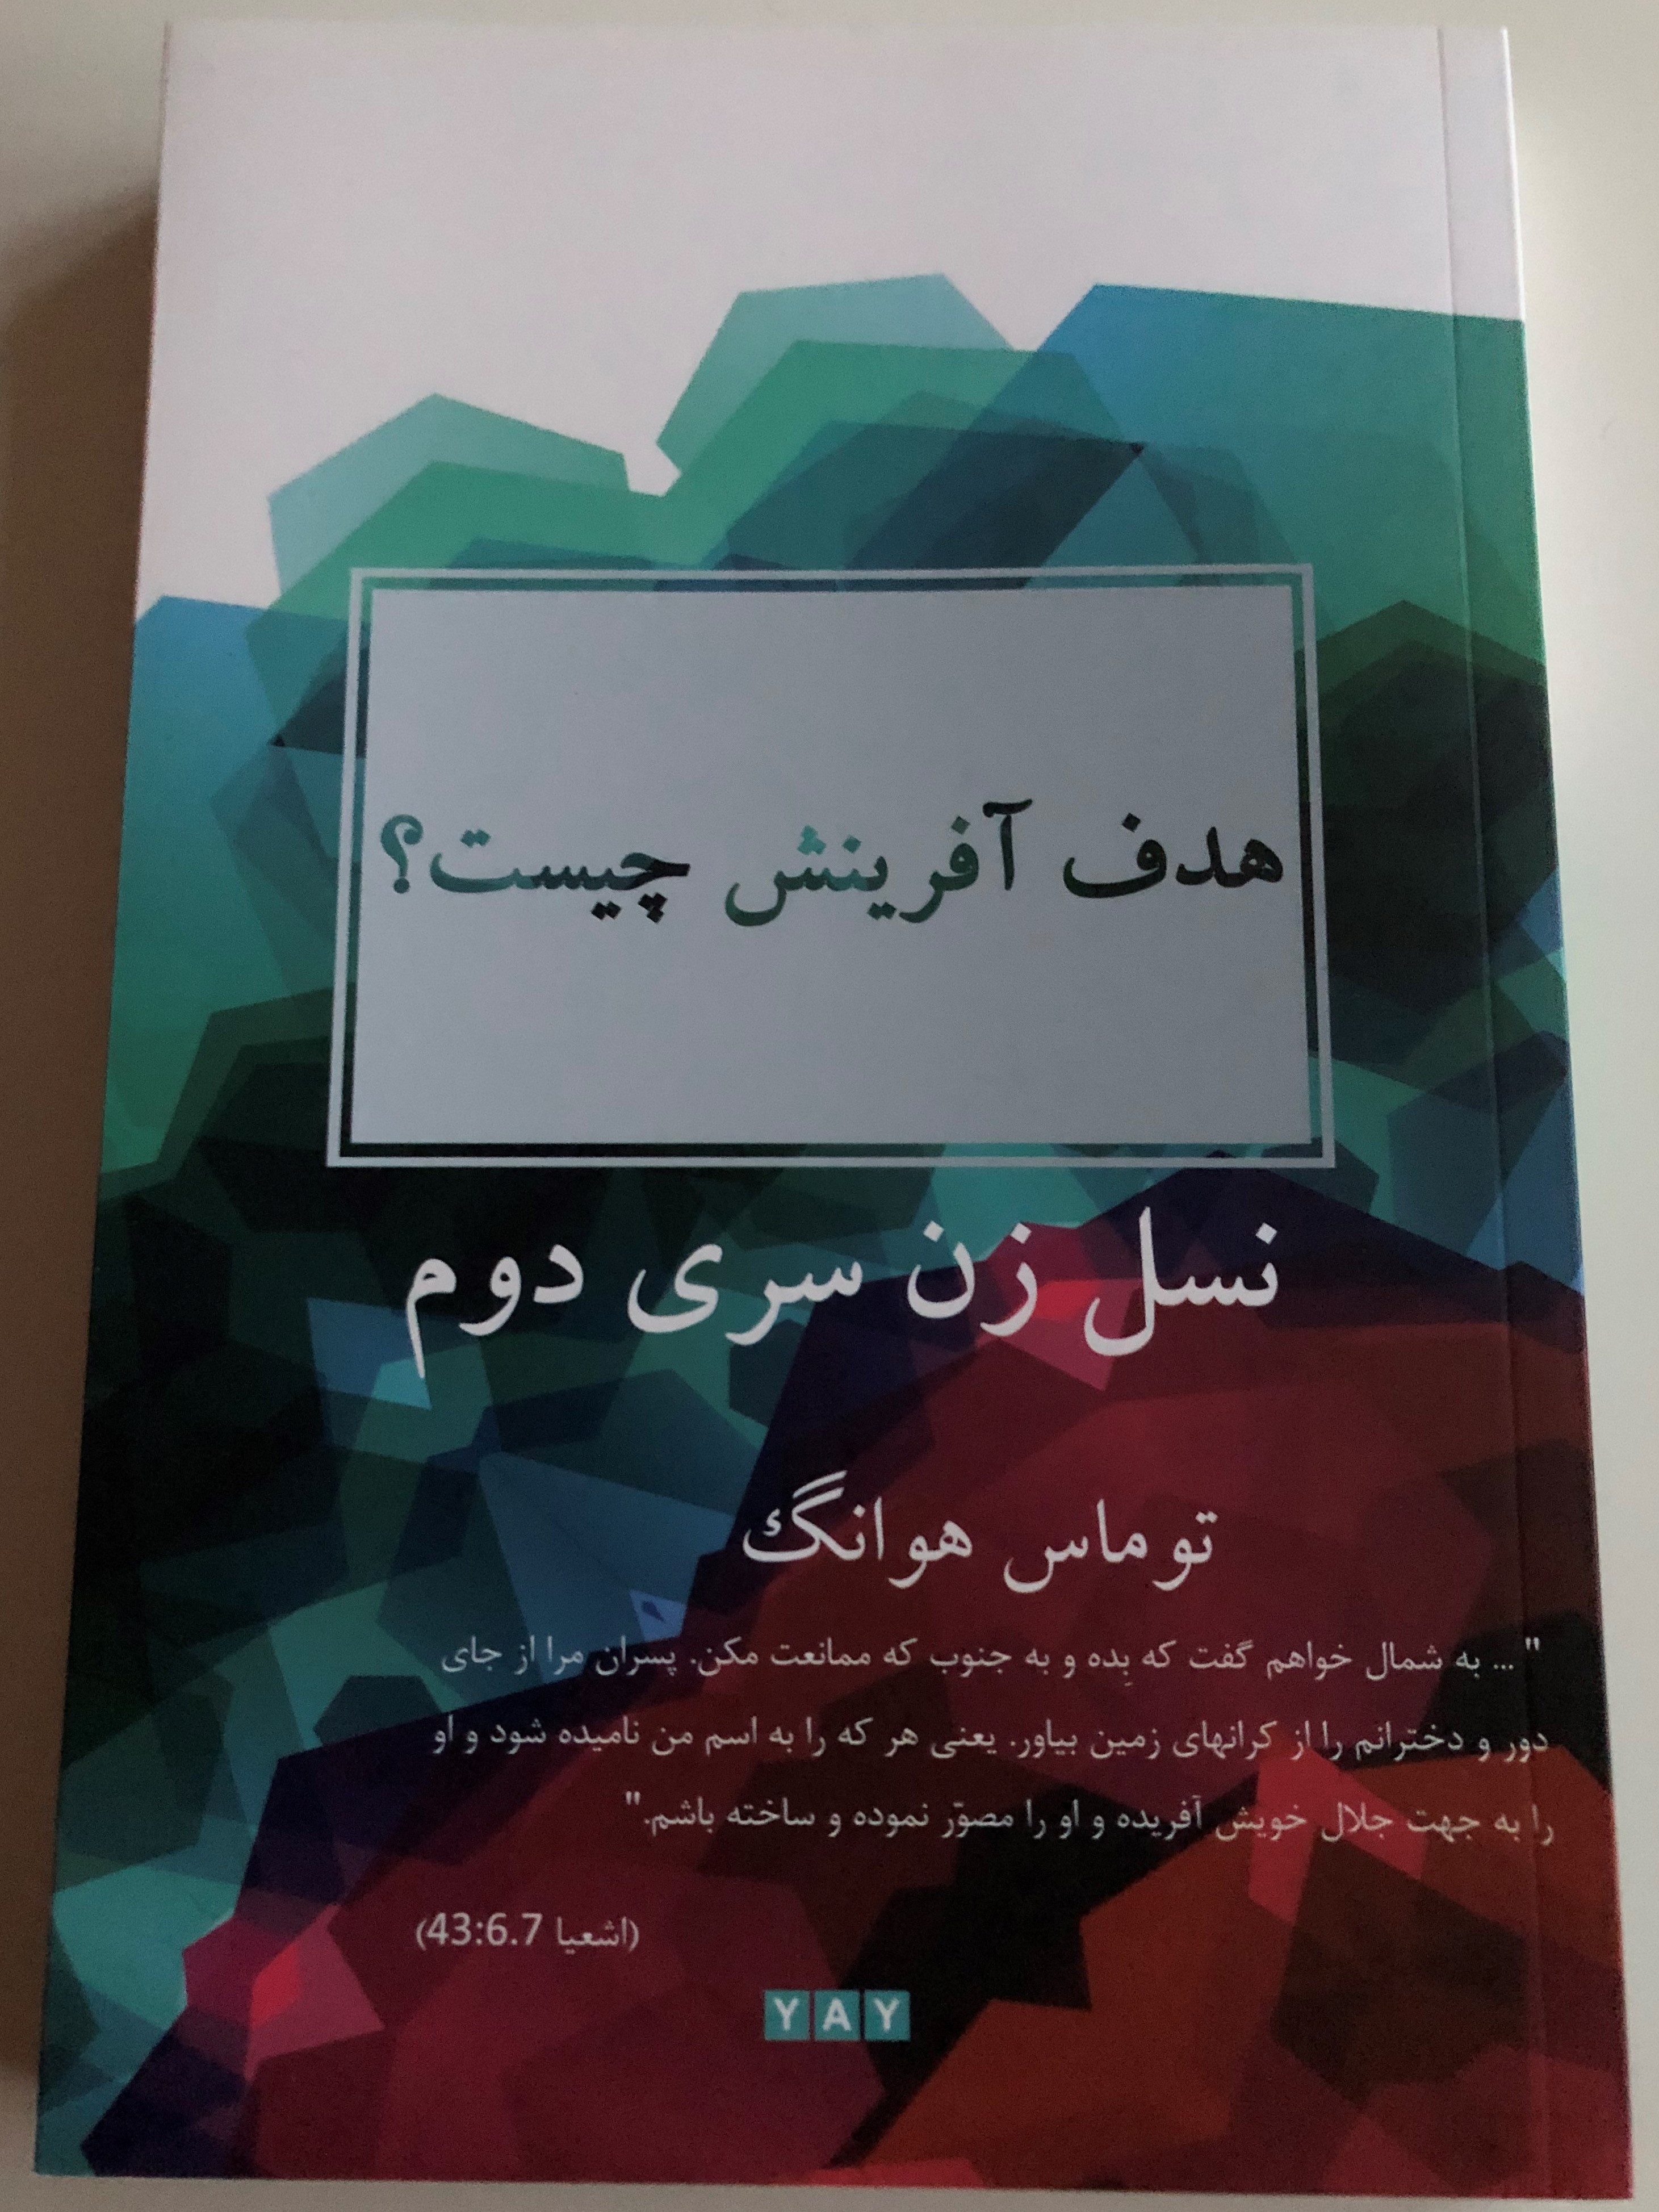 what-is-the-purpose-of-creation-by-thomas-hwang-farsi-edition-1-.jpg